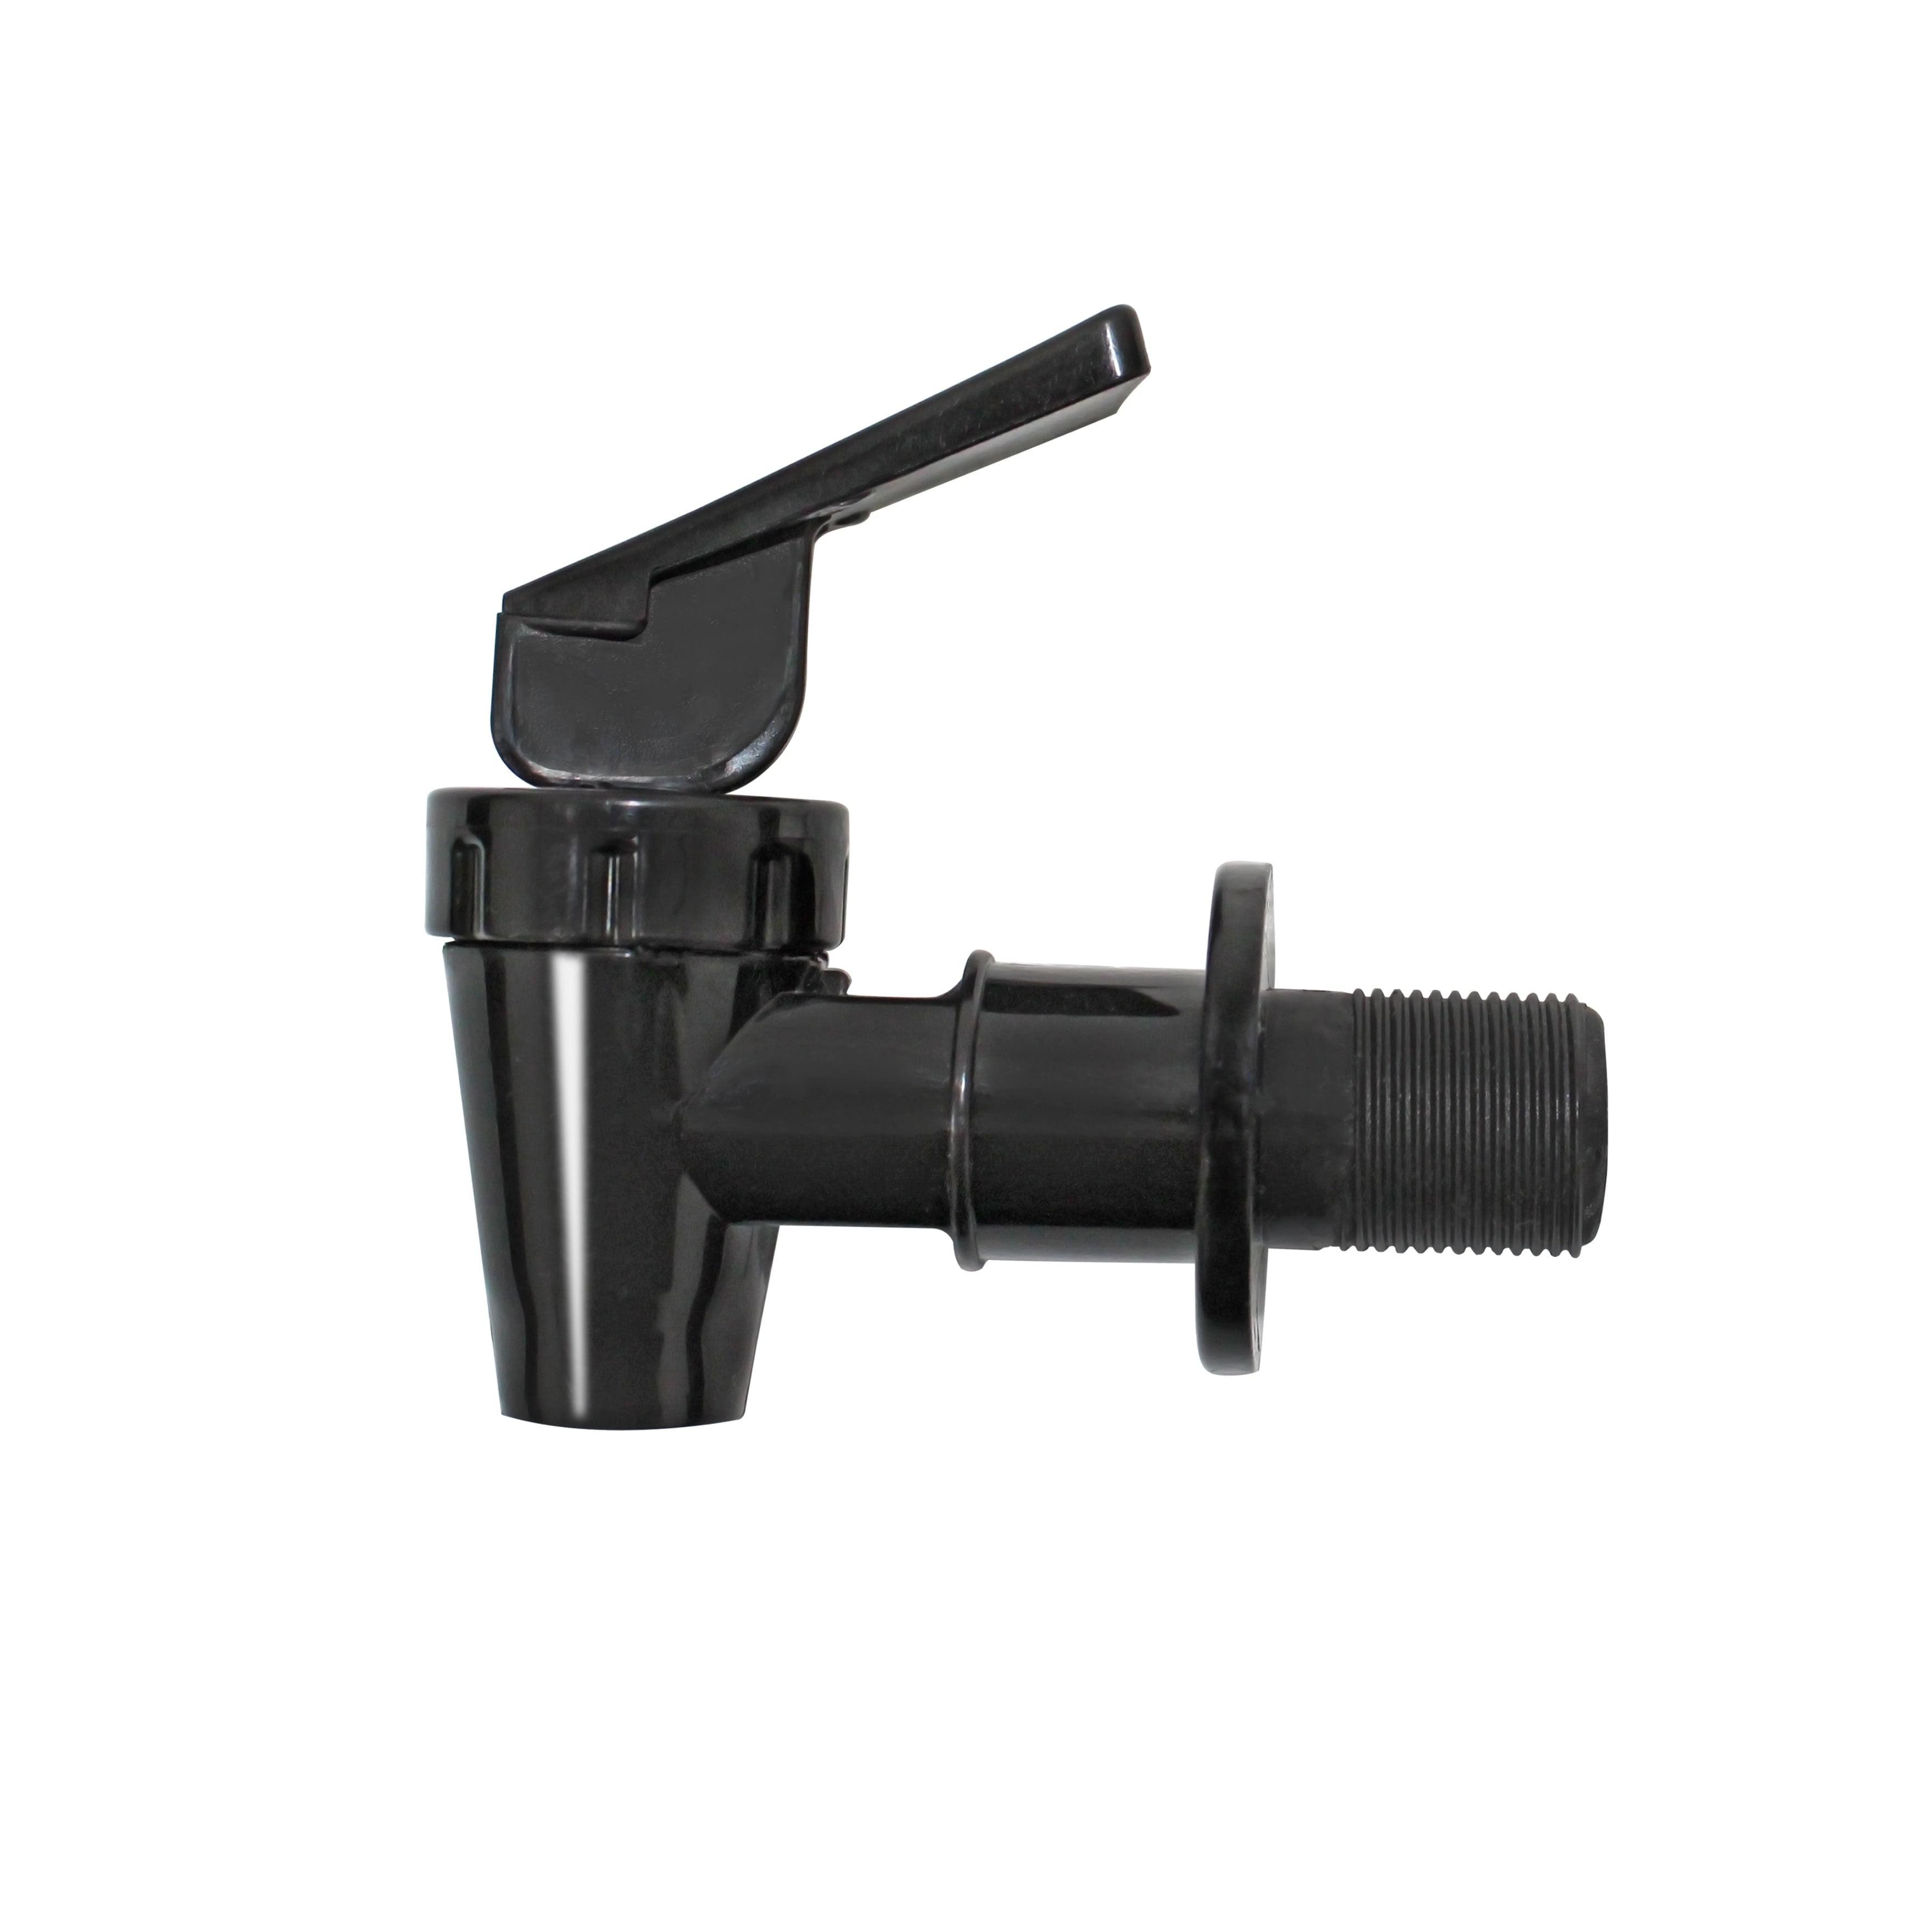 Genuine RAMA Superfine Tap for Rama Gravity-Fed Water Filters - Rama Water Filters